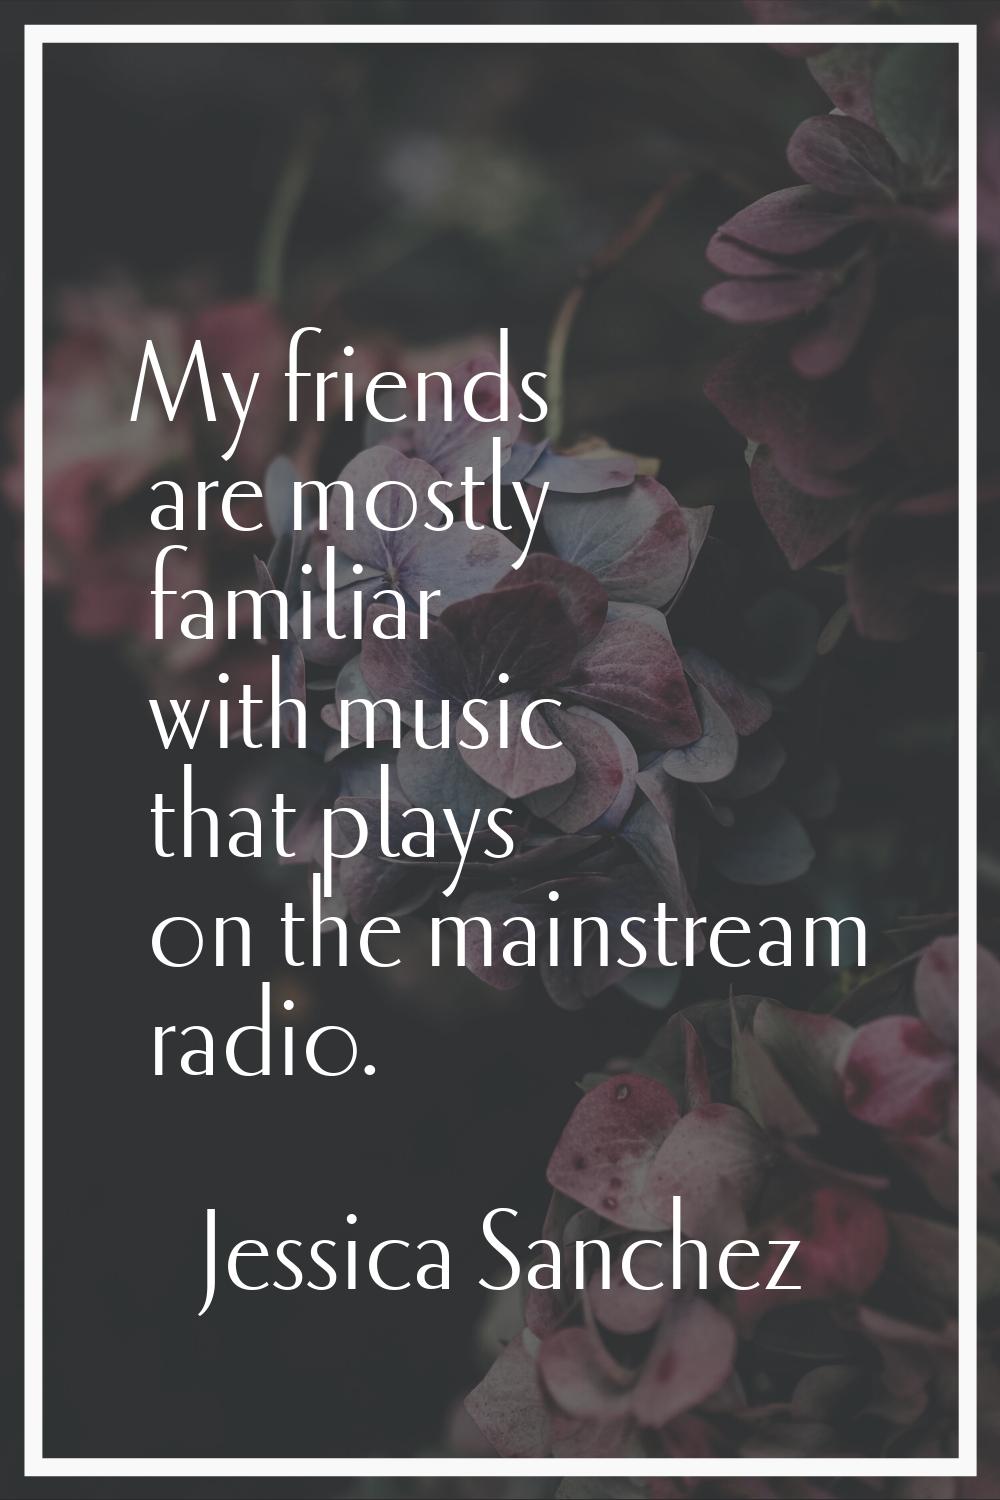 My friends are mostly familiar with music that plays on the mainstream radio.